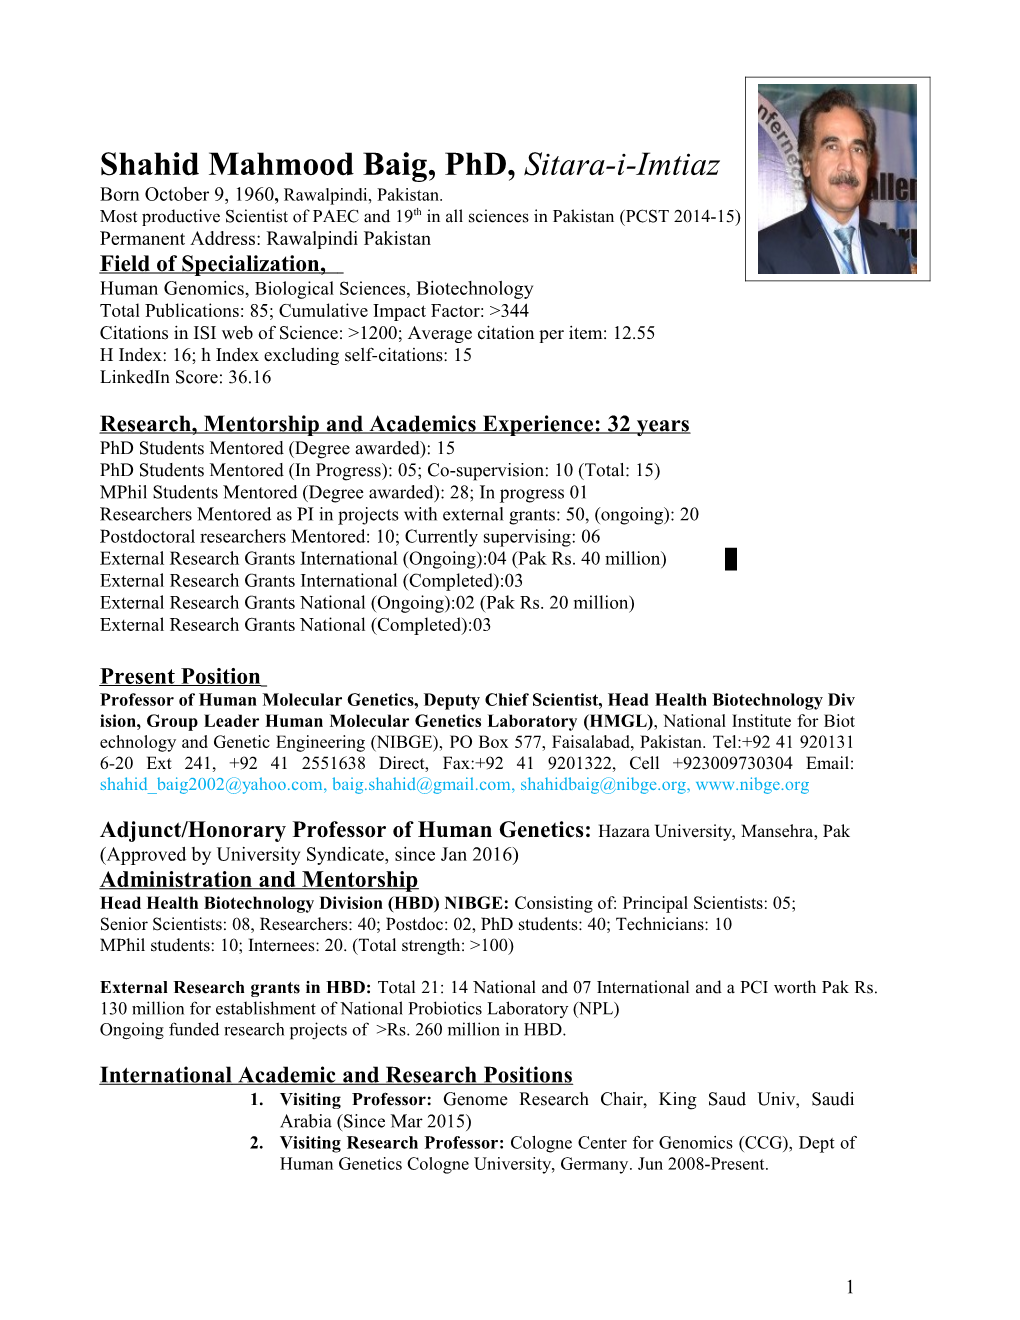 Most Productive Scientist of PAEC and 19Th in All Sciences in Pakistan (PCST 2014-15)